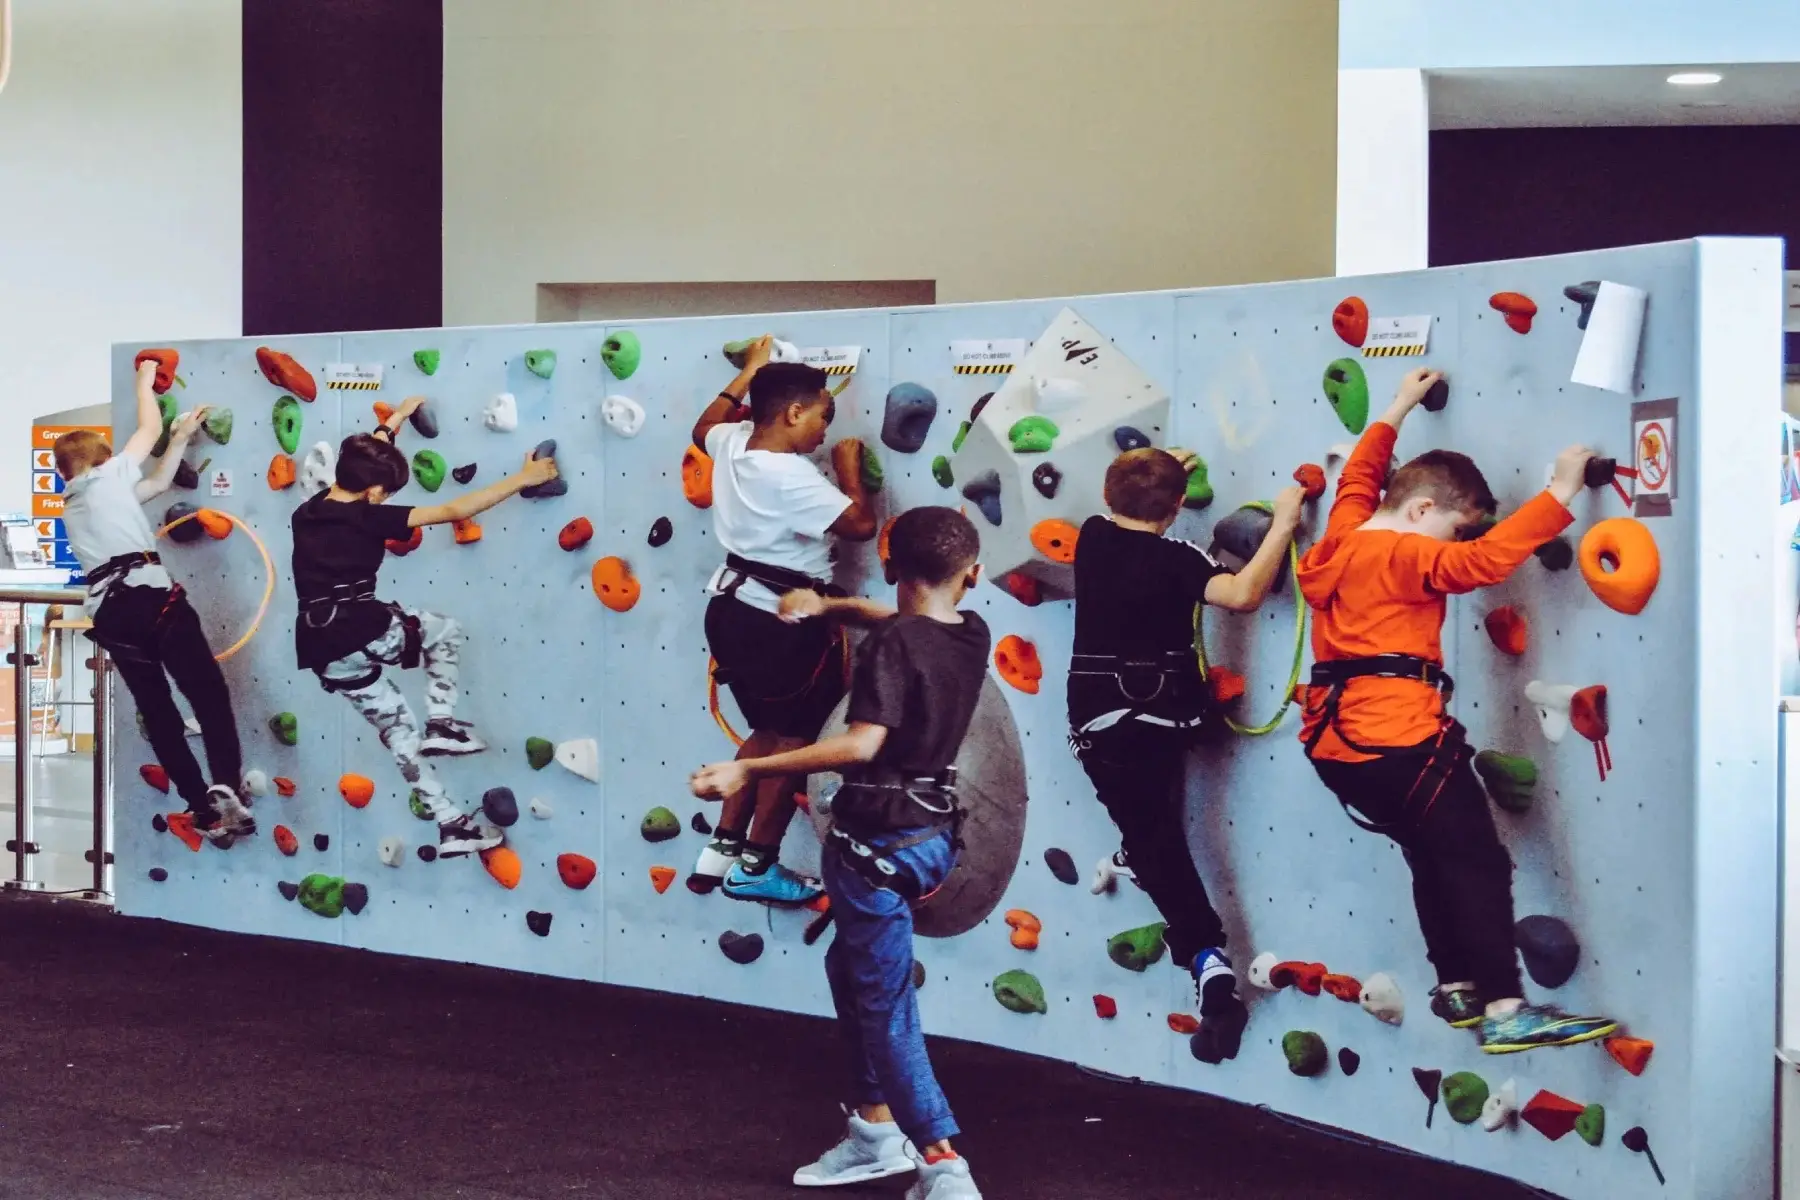 Group of young boys attending an indoor climbing club as an extracurricular activity outside of school